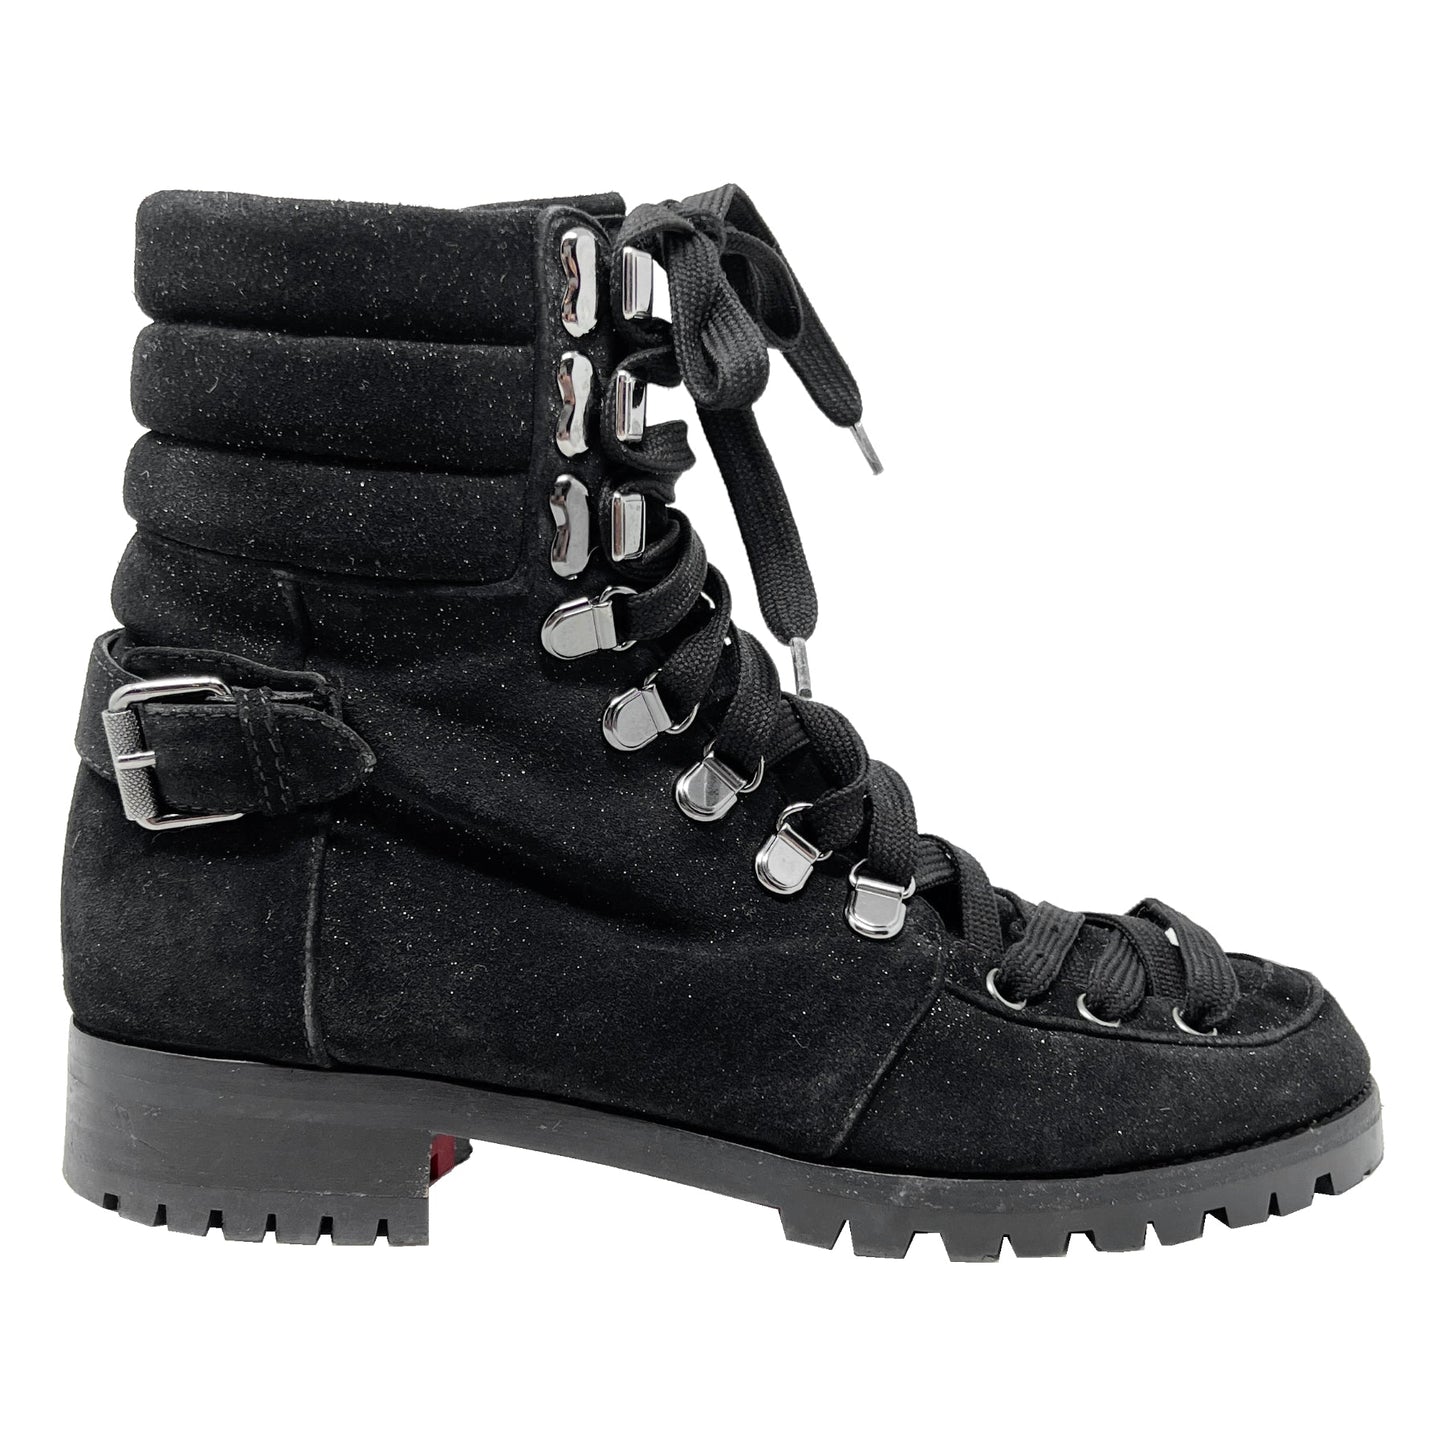 Christian Louboutin Boots Who Runs Black Shimmer Suede Lace Up Round Toe Rubber Sole Ankle Boots